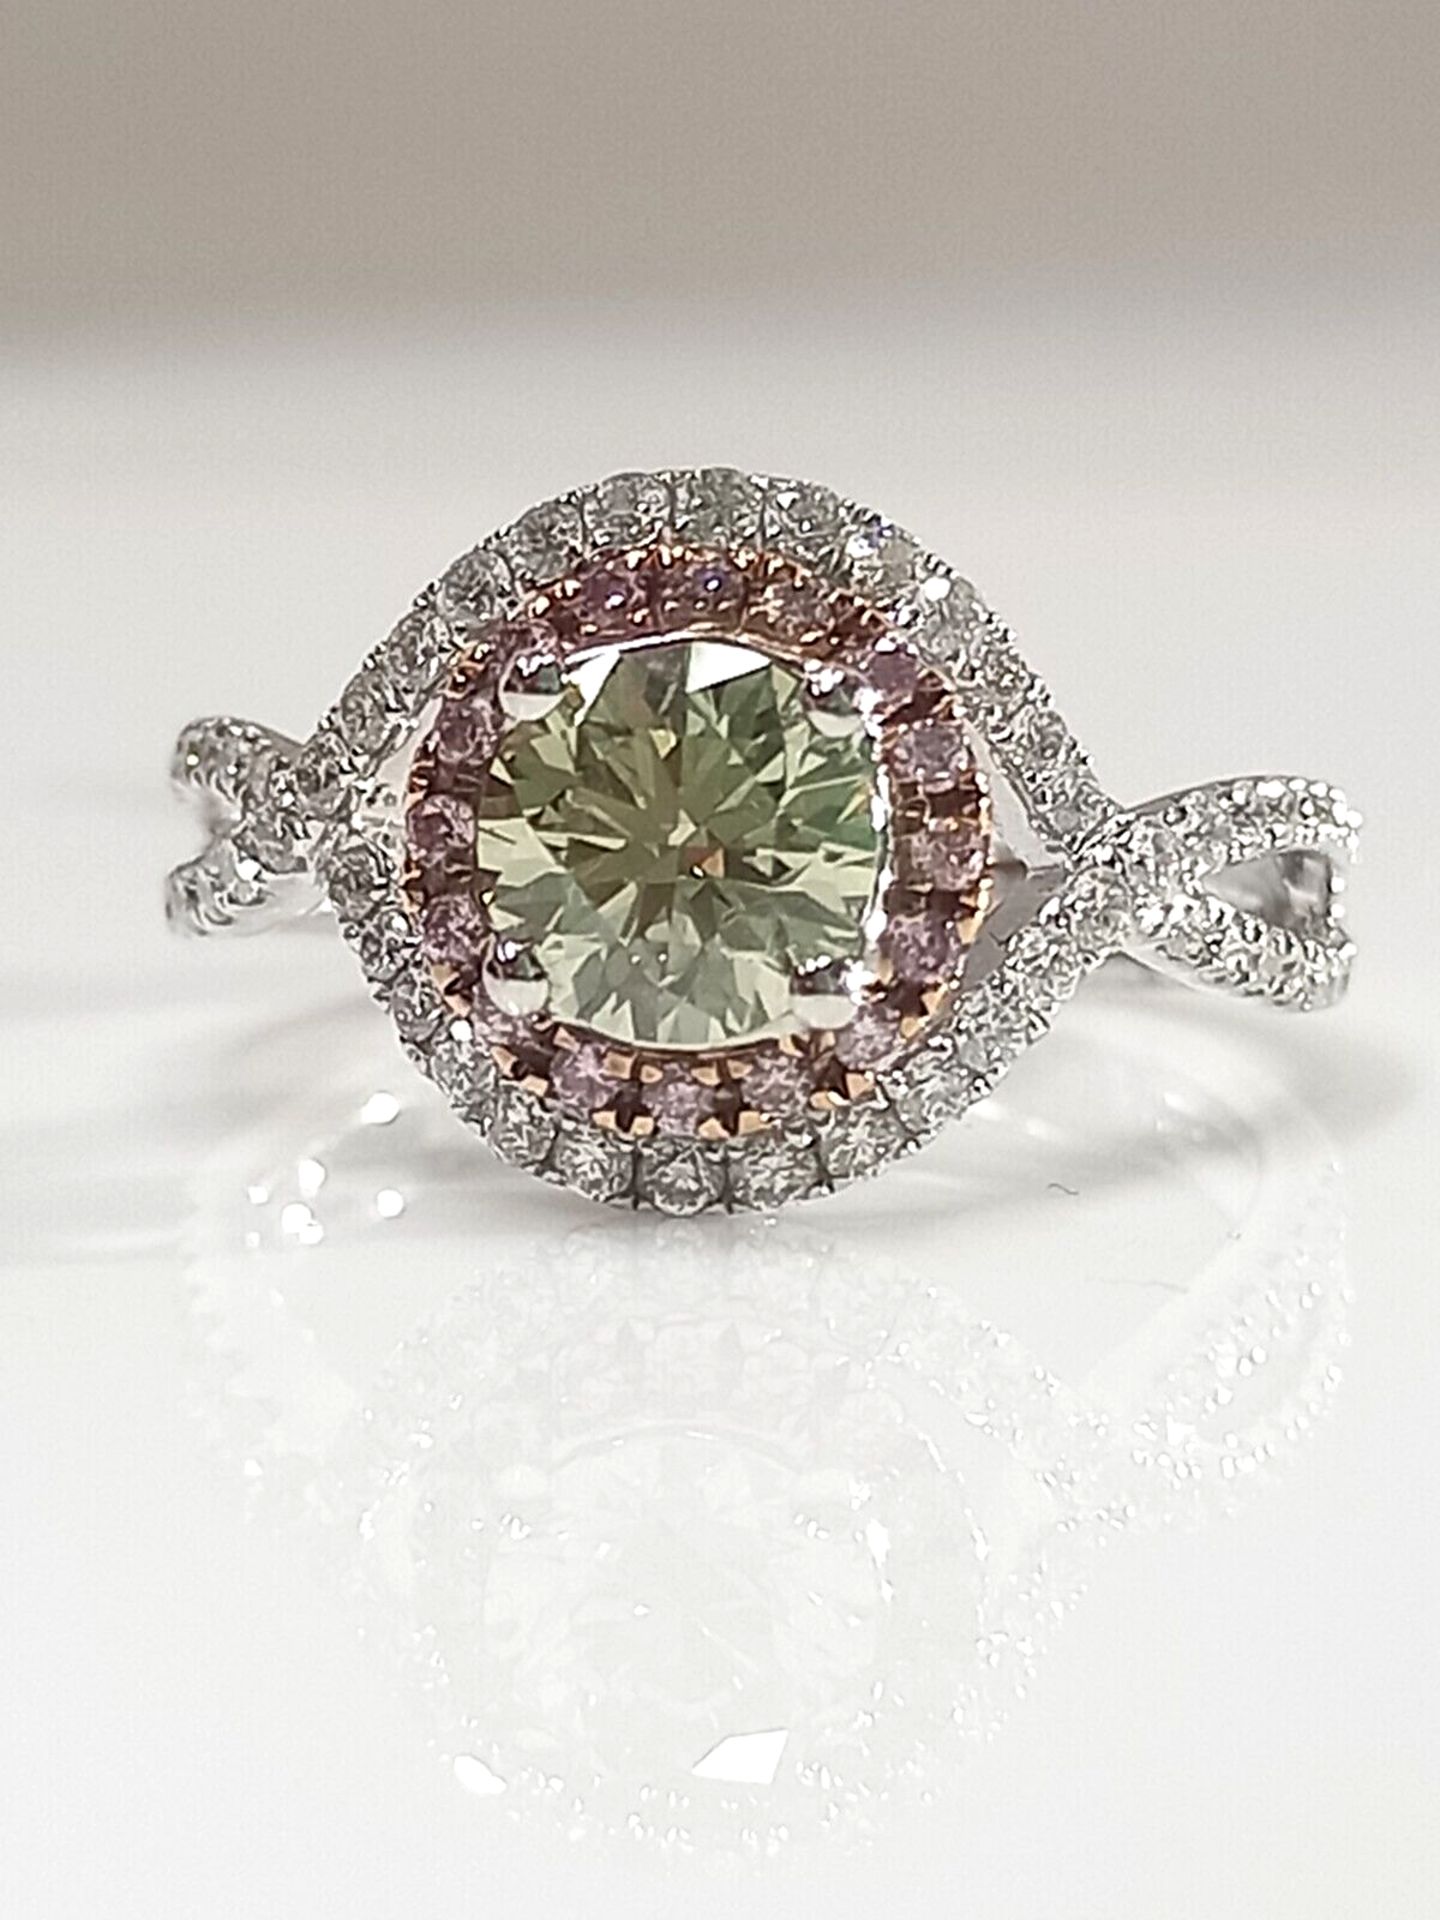 EXQUSITE 1.36CT GREEN/PINK/WHITE DIAMOND HALLO SET ENGAGEMENT RING + VALUATION CERT OF £12995 - Image 3 of 9